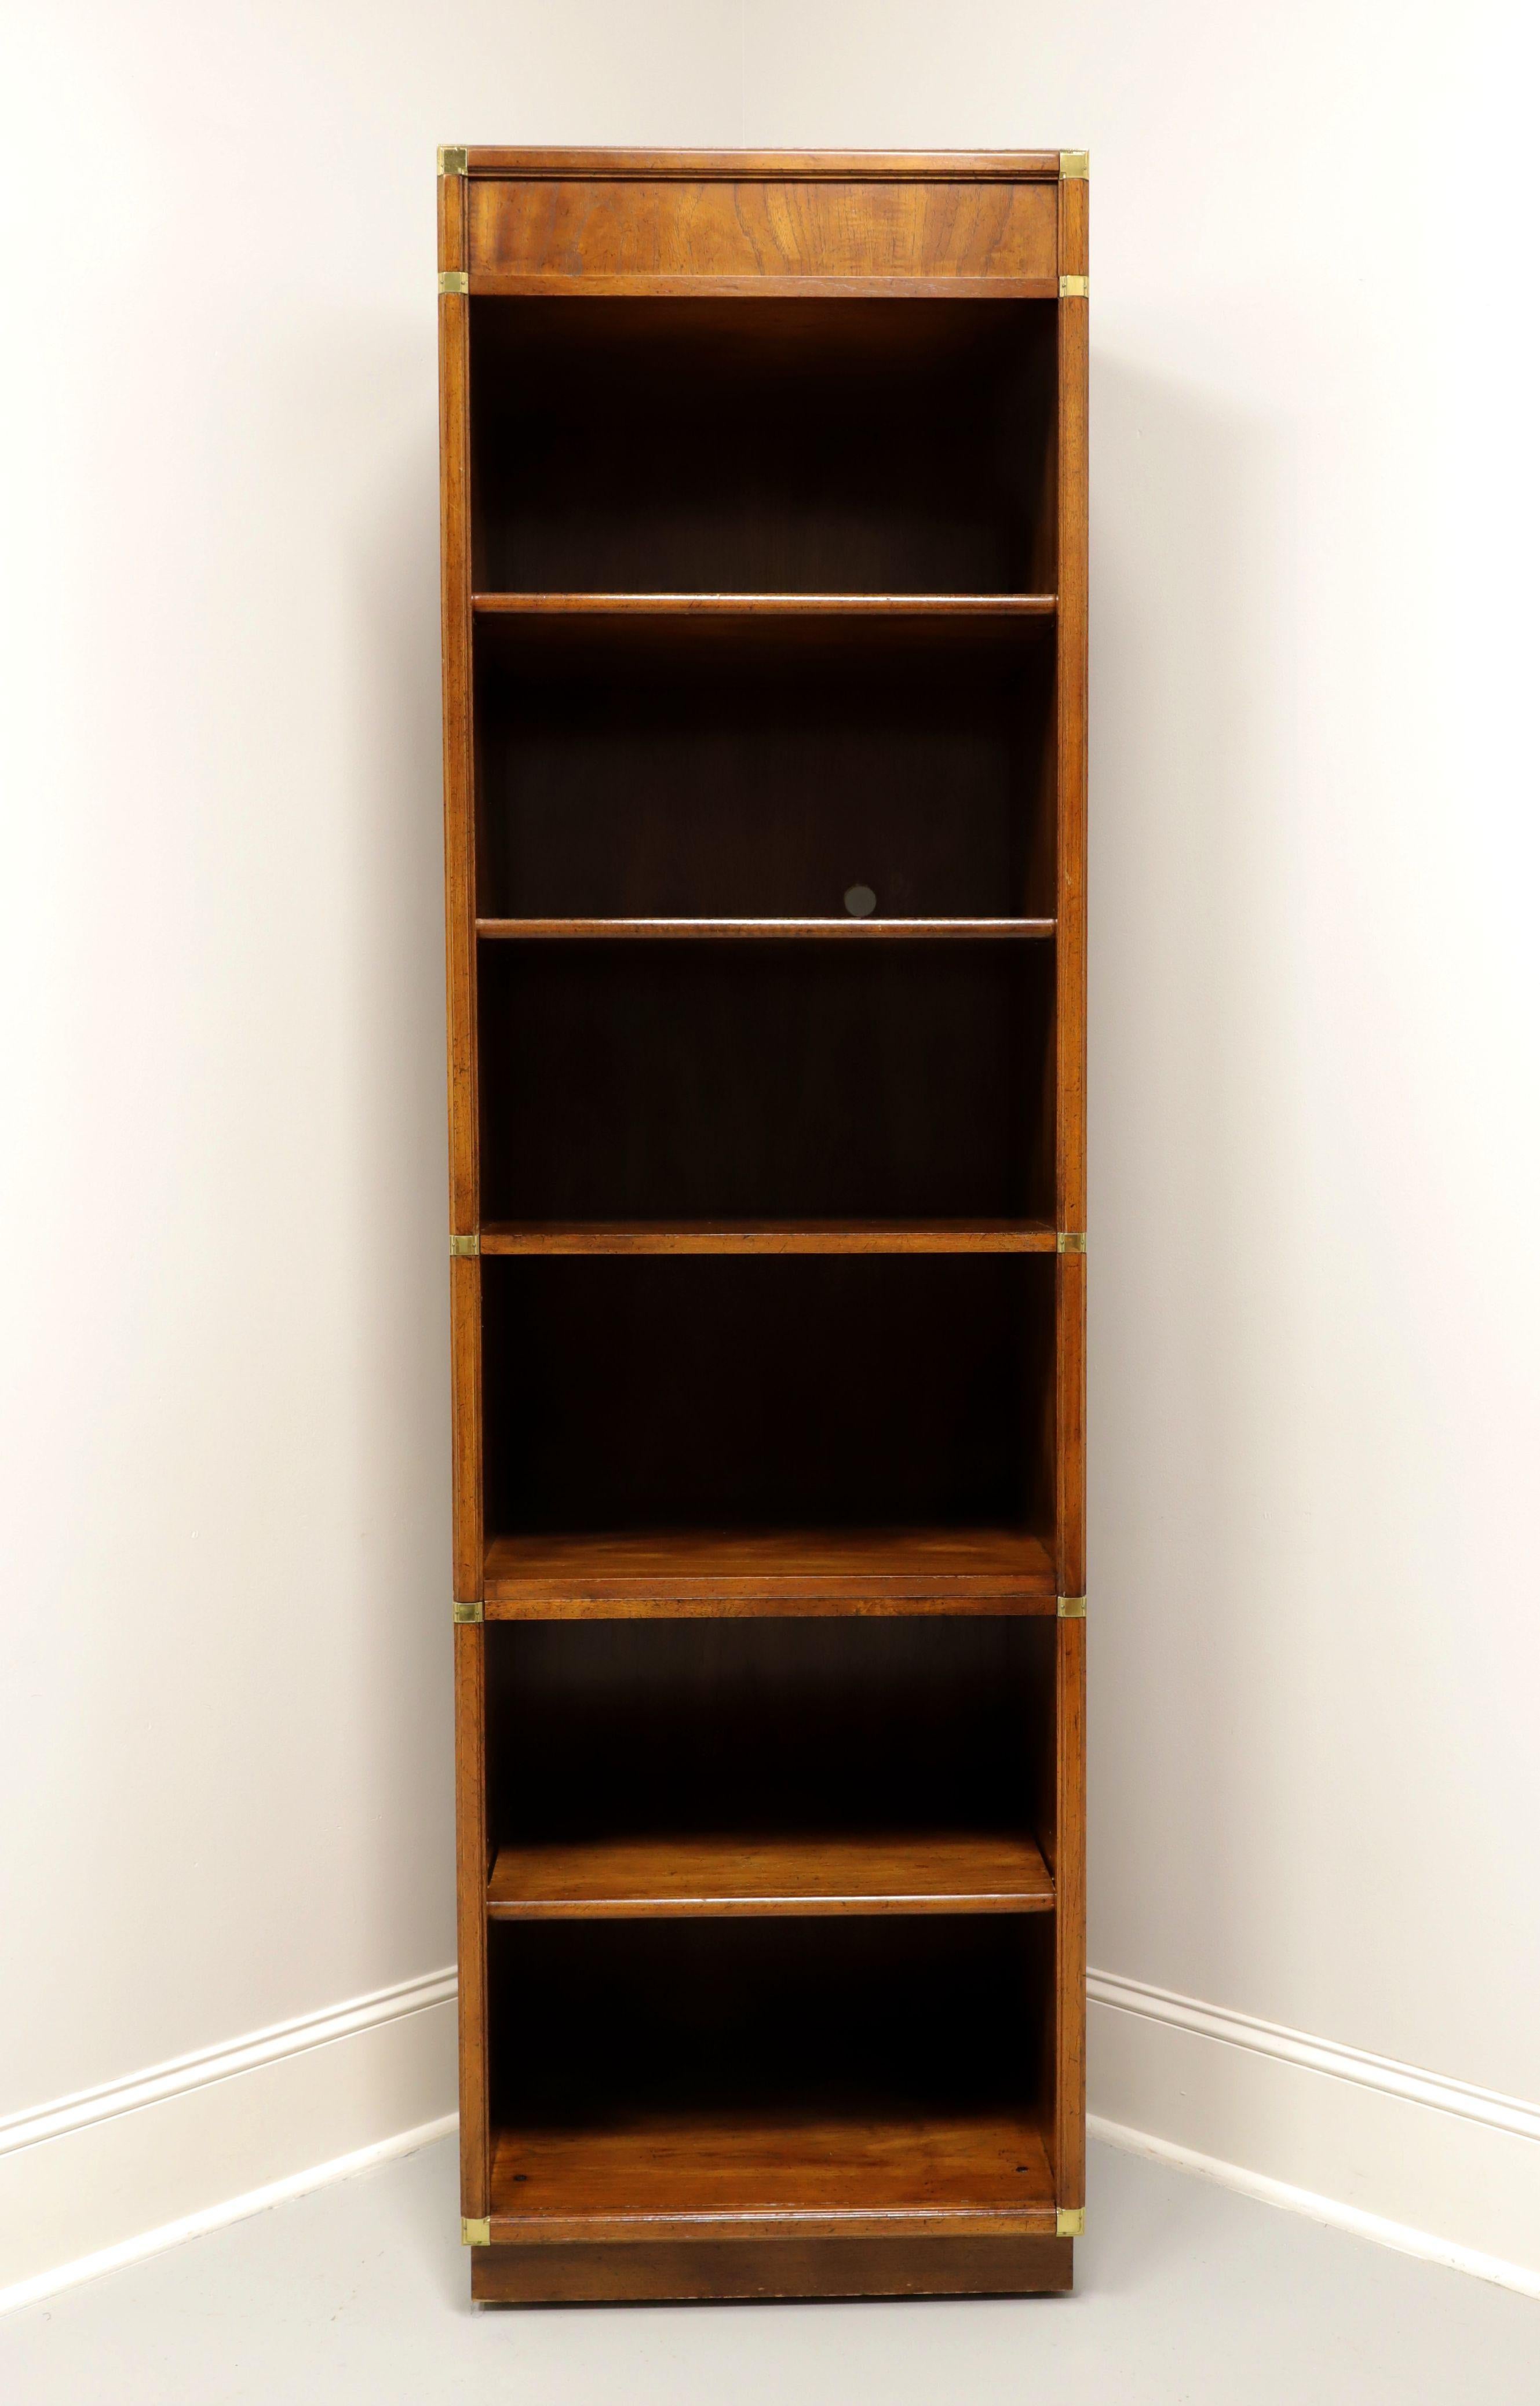 A Campaign style narrow shelving unit by Gordon's Furniture, of Johnson City, Tennessee, USA. Fruitwood with decorative brass accents. Features a flat front, double fixed shelf to center creating the appearance of an upper and lower section, one